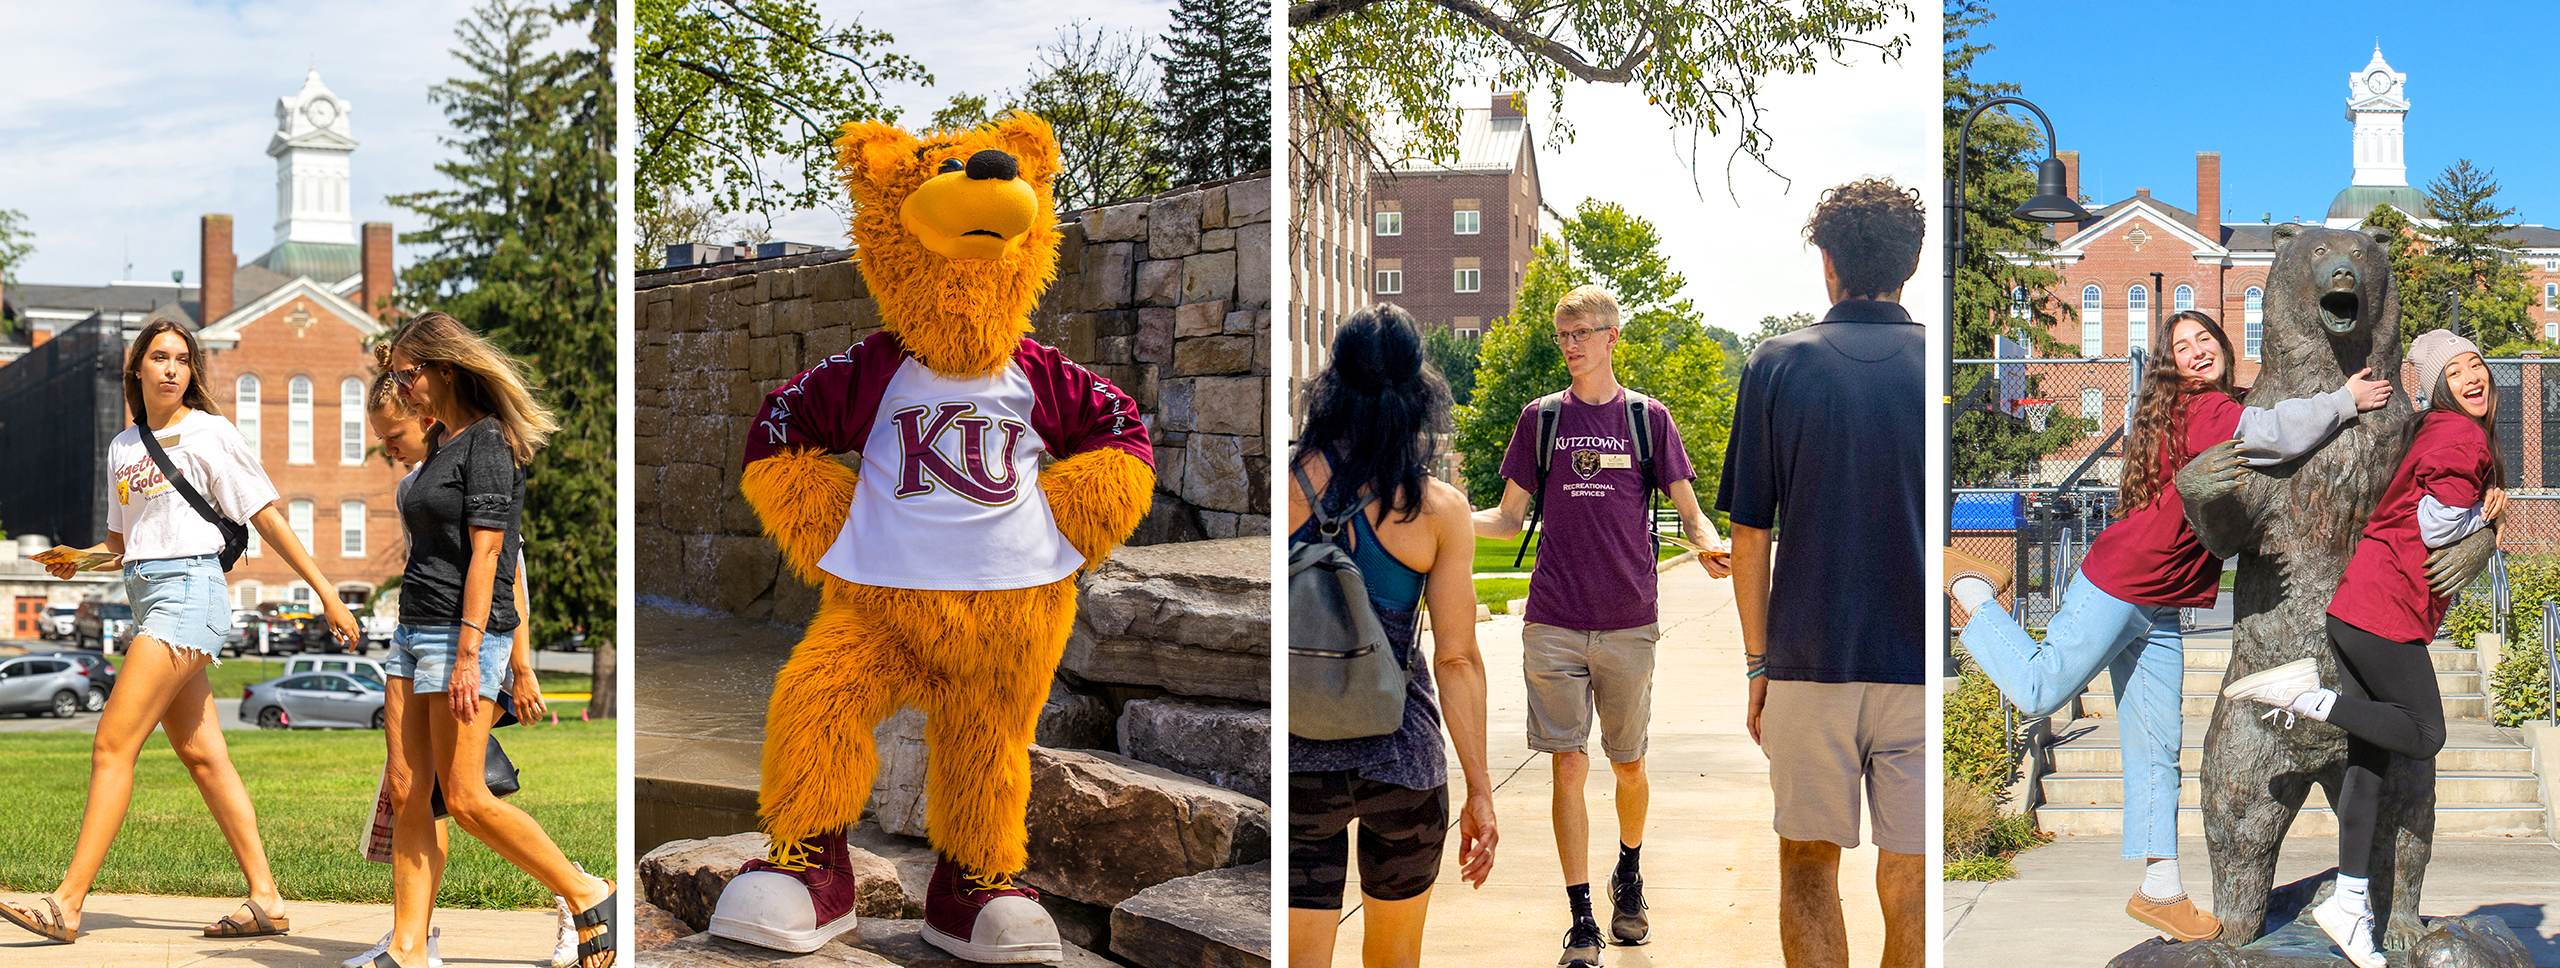 Pictures of tours at Kutztown University